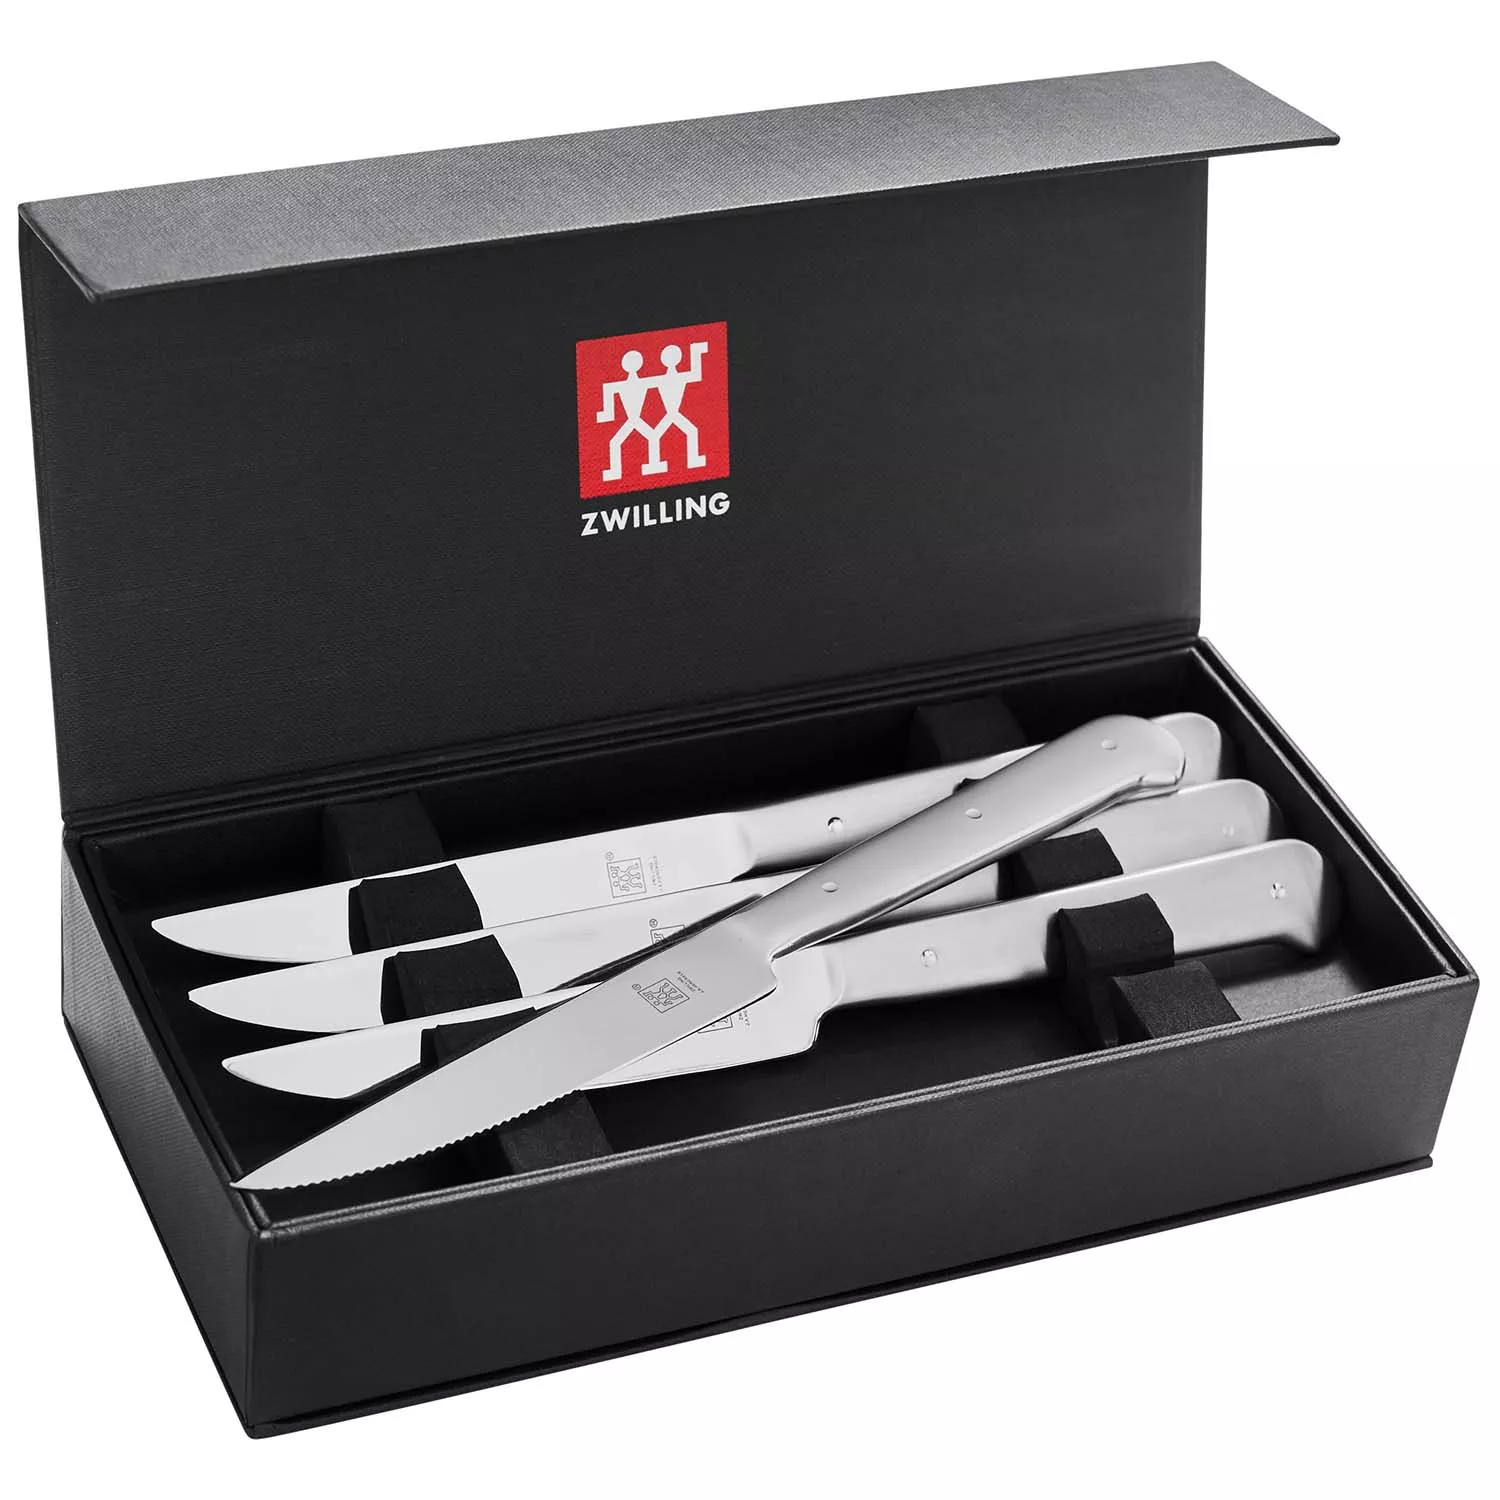 8PCS Professional Steak Knives Set with Sharp Serrated Blade and